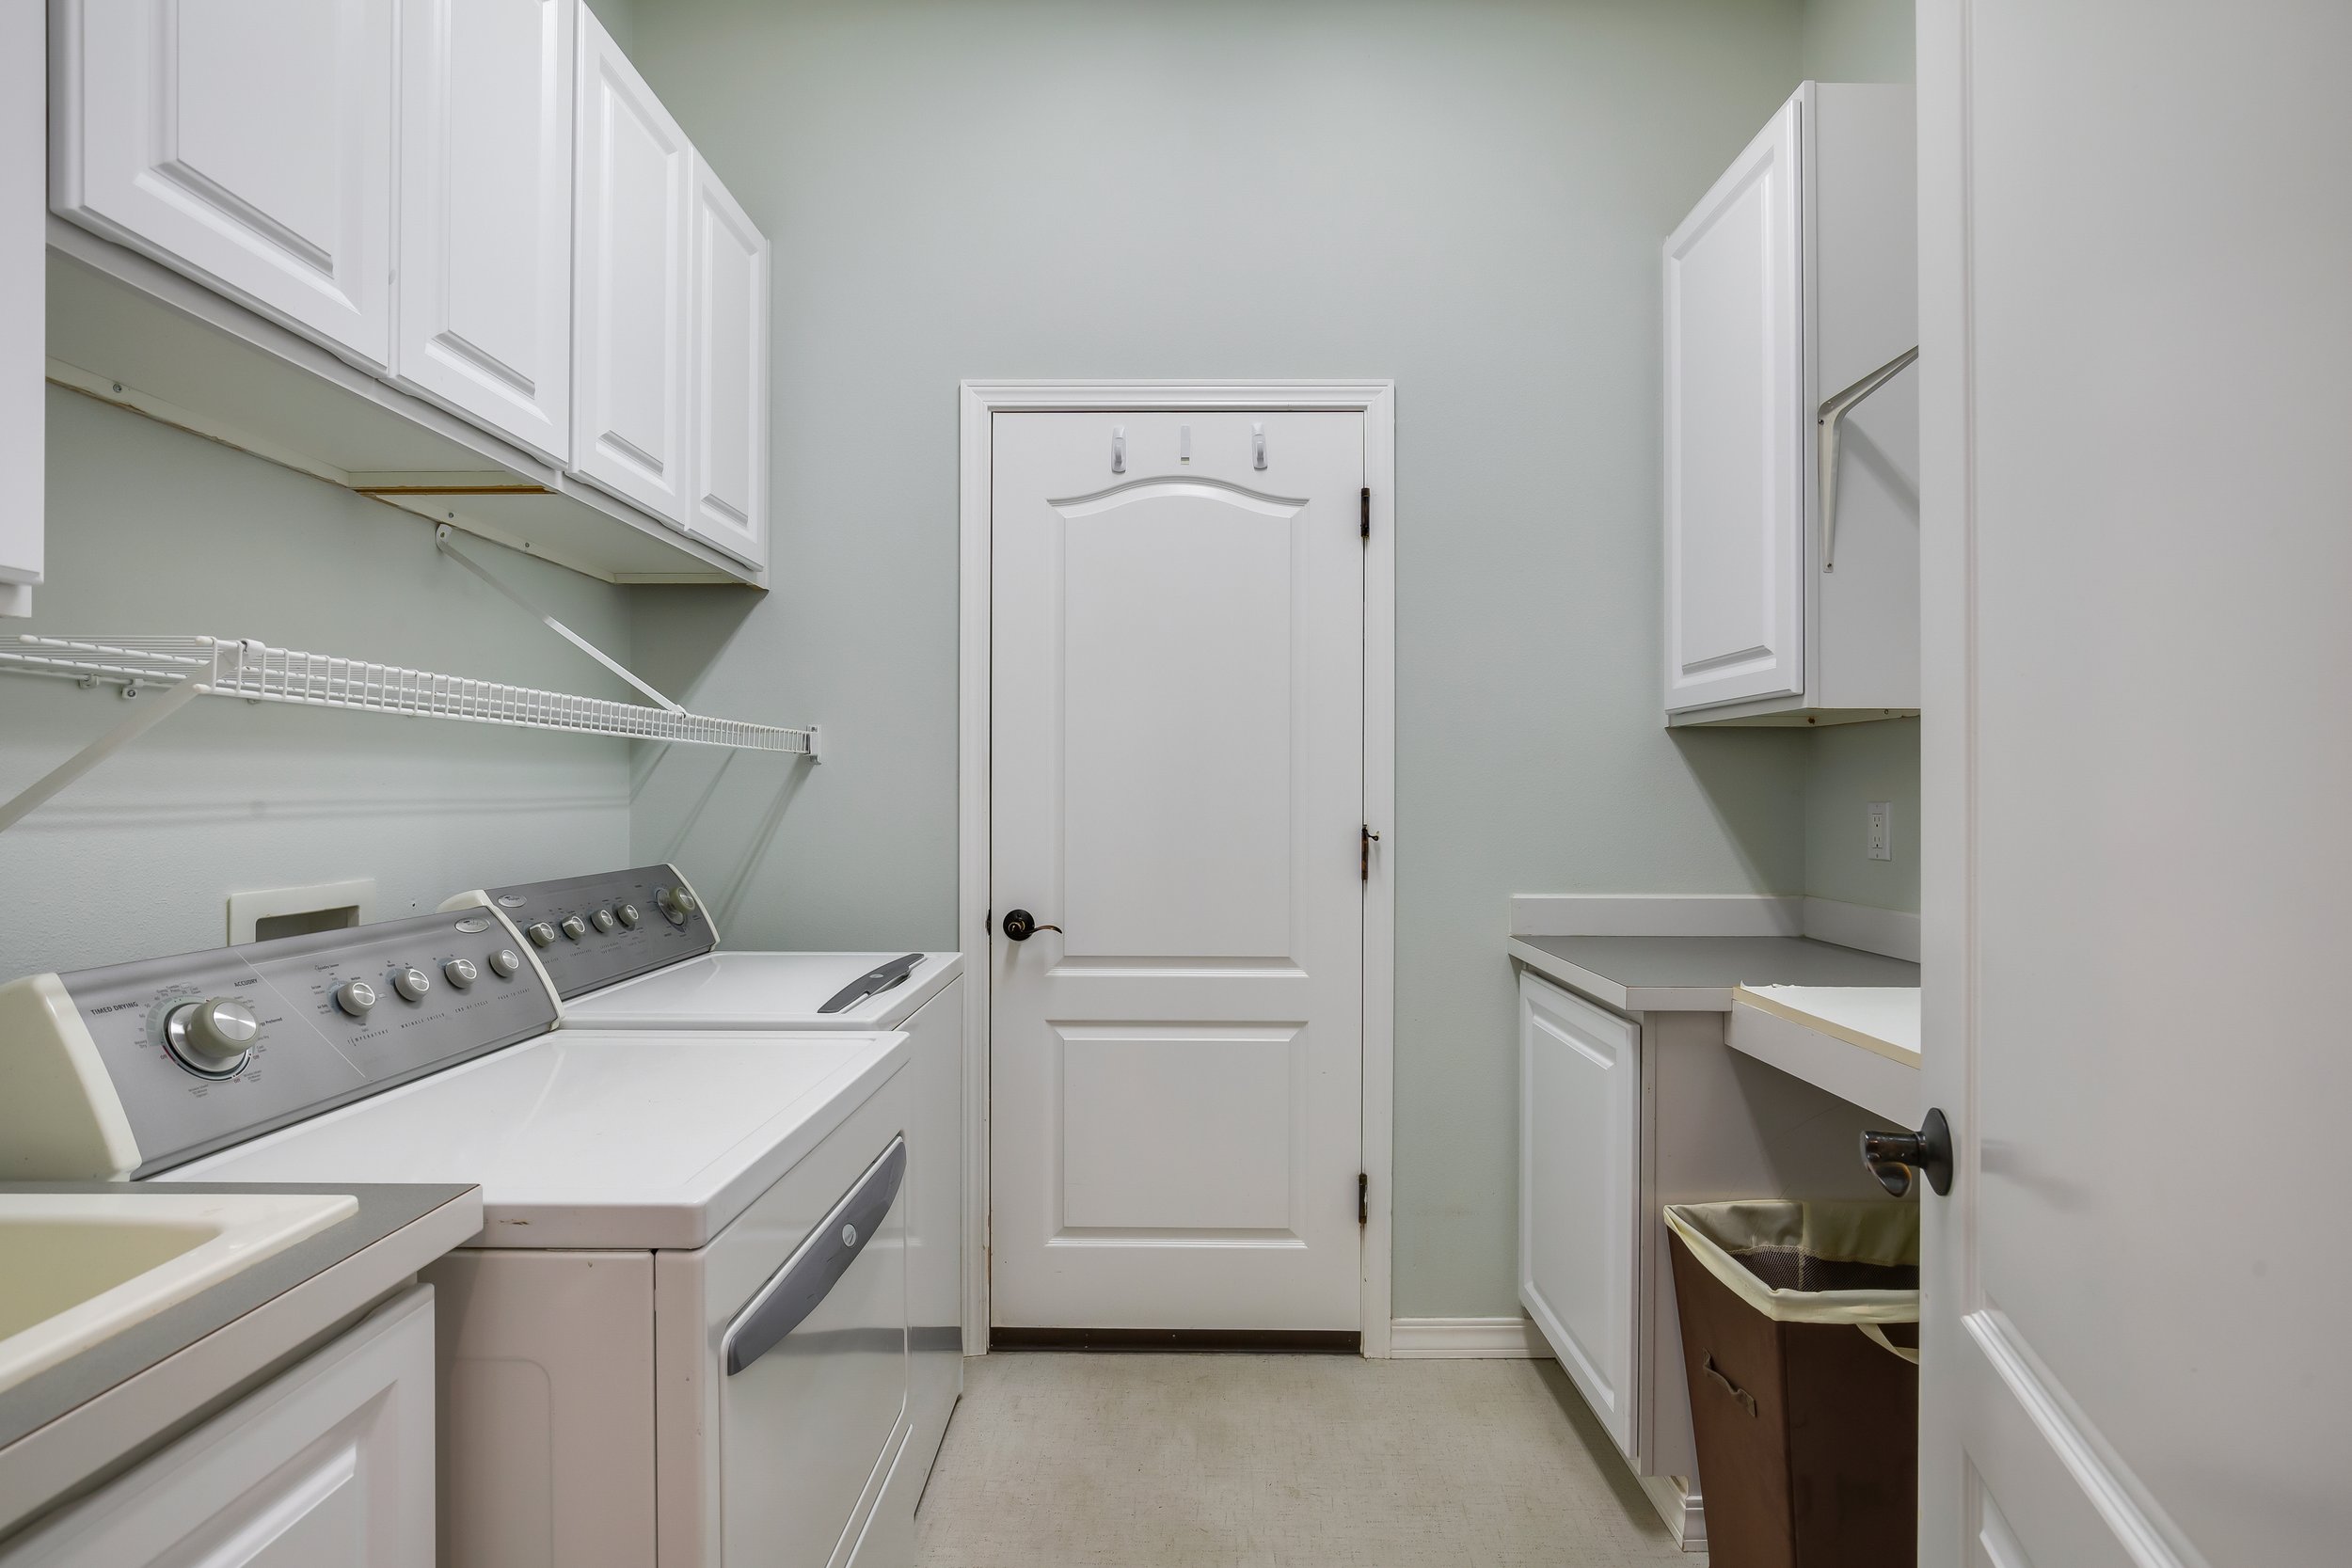  interior of laundry room with cabinets, washer and dryer 